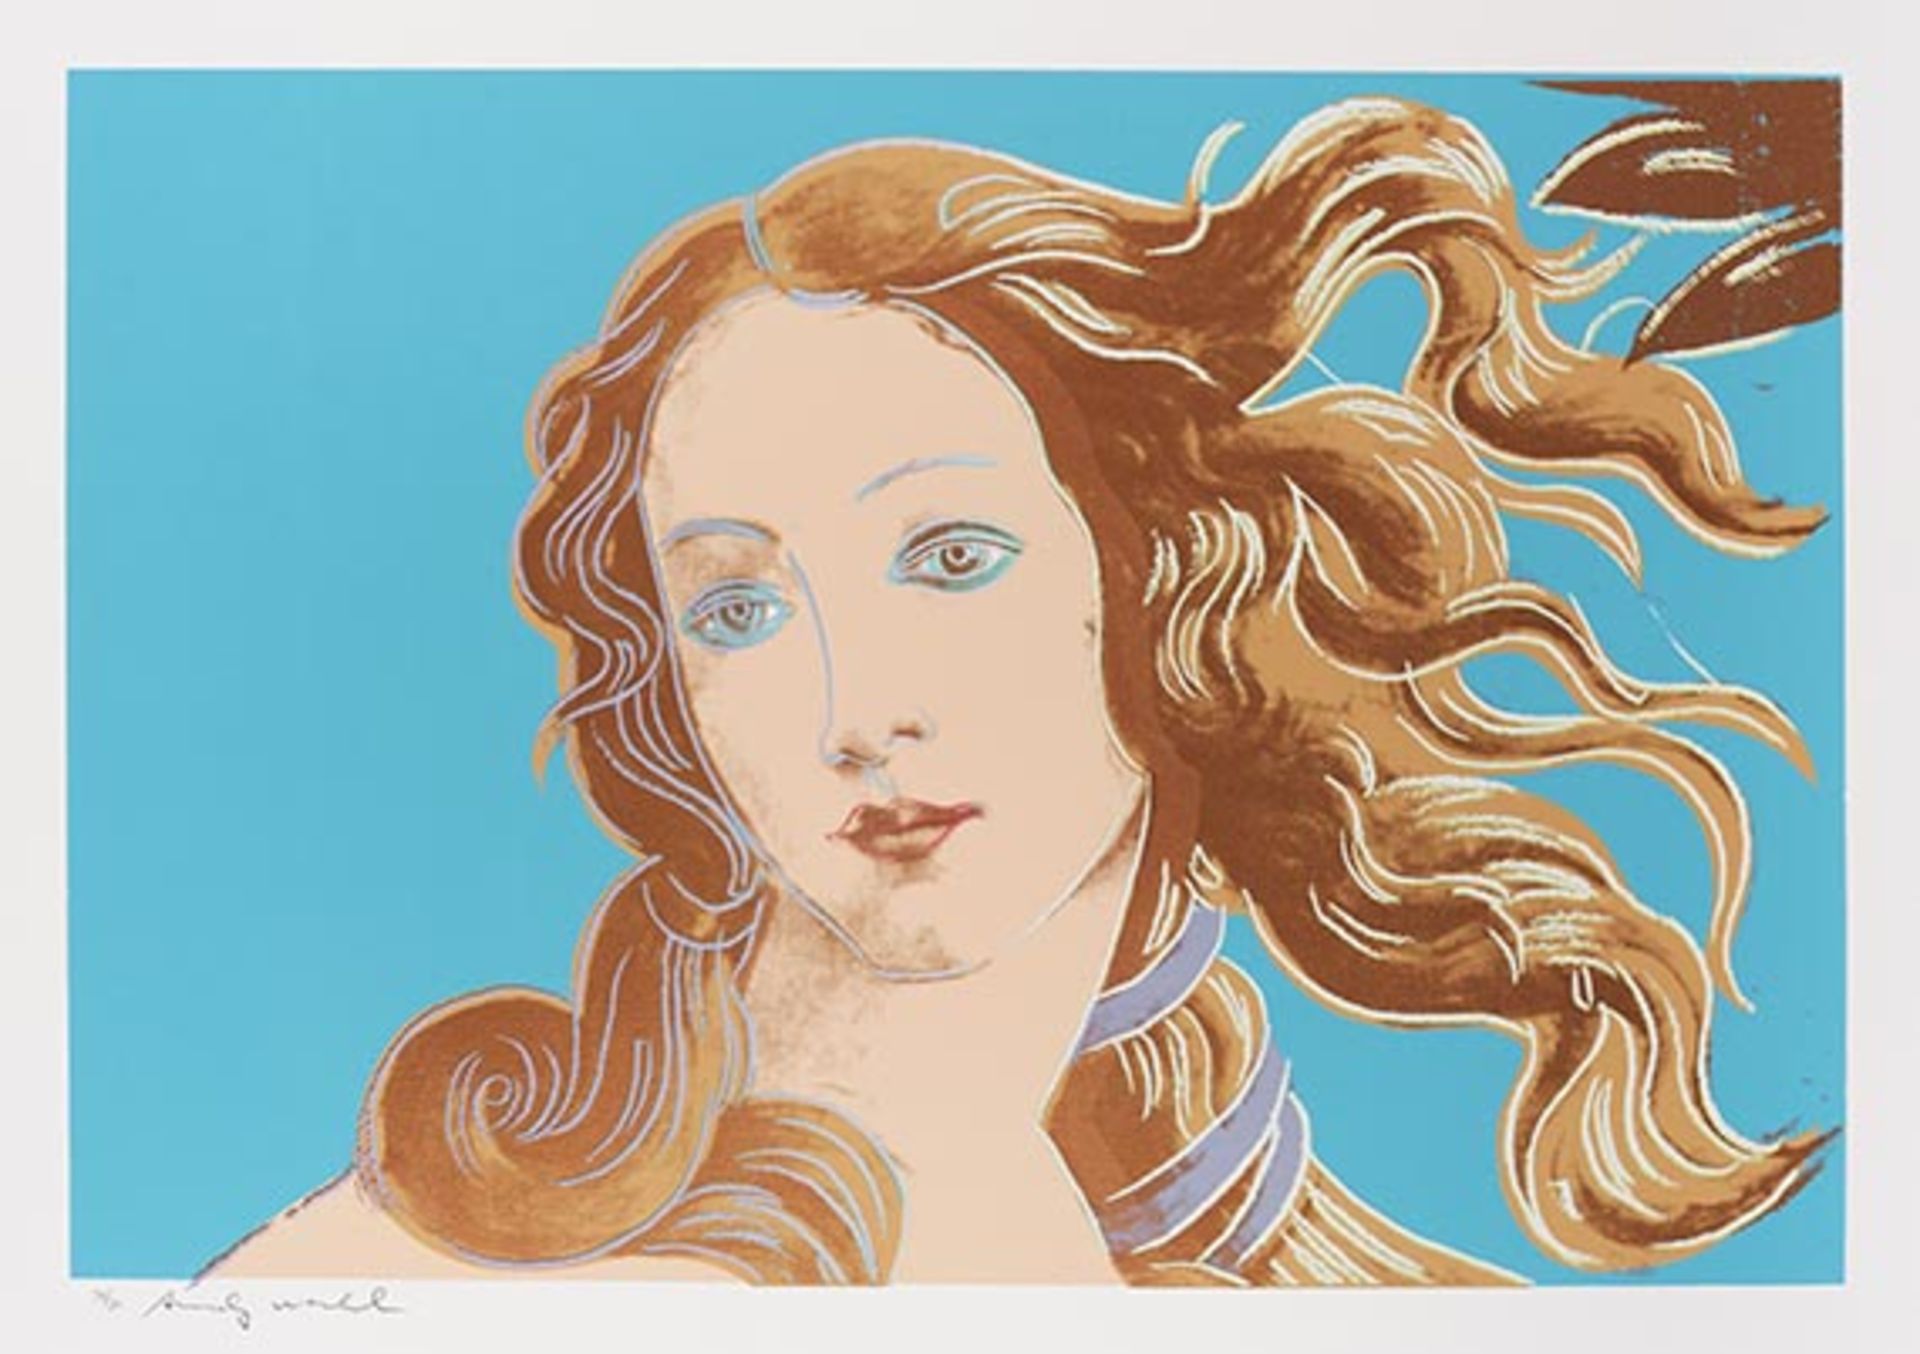 Andy Warhol 1928 Pittsburgh - 1987 New York Details of Renaissance Paintings (Sandro Botticelli,